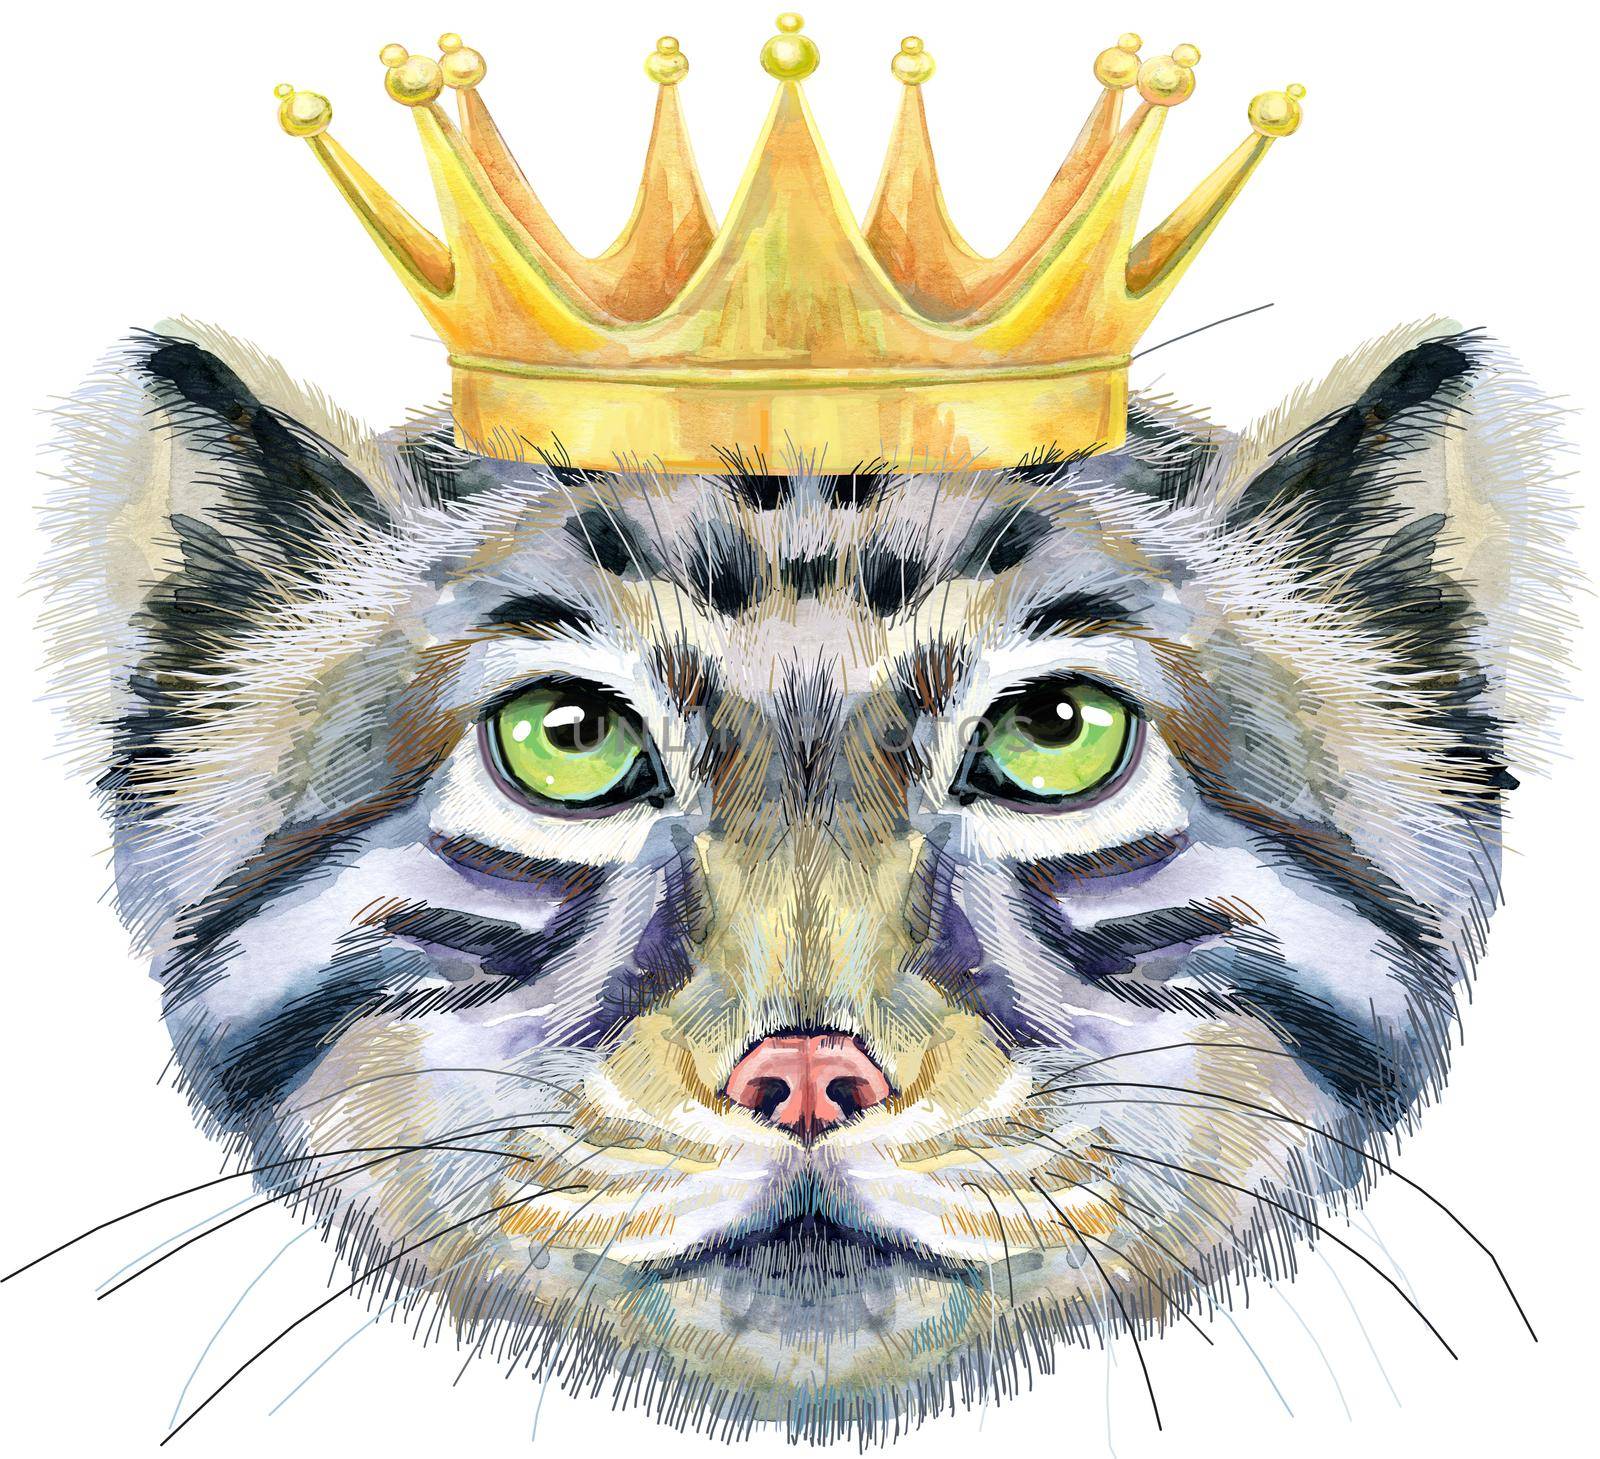 Watercolor drawing of the animal - cat manul in golden crown, sketch